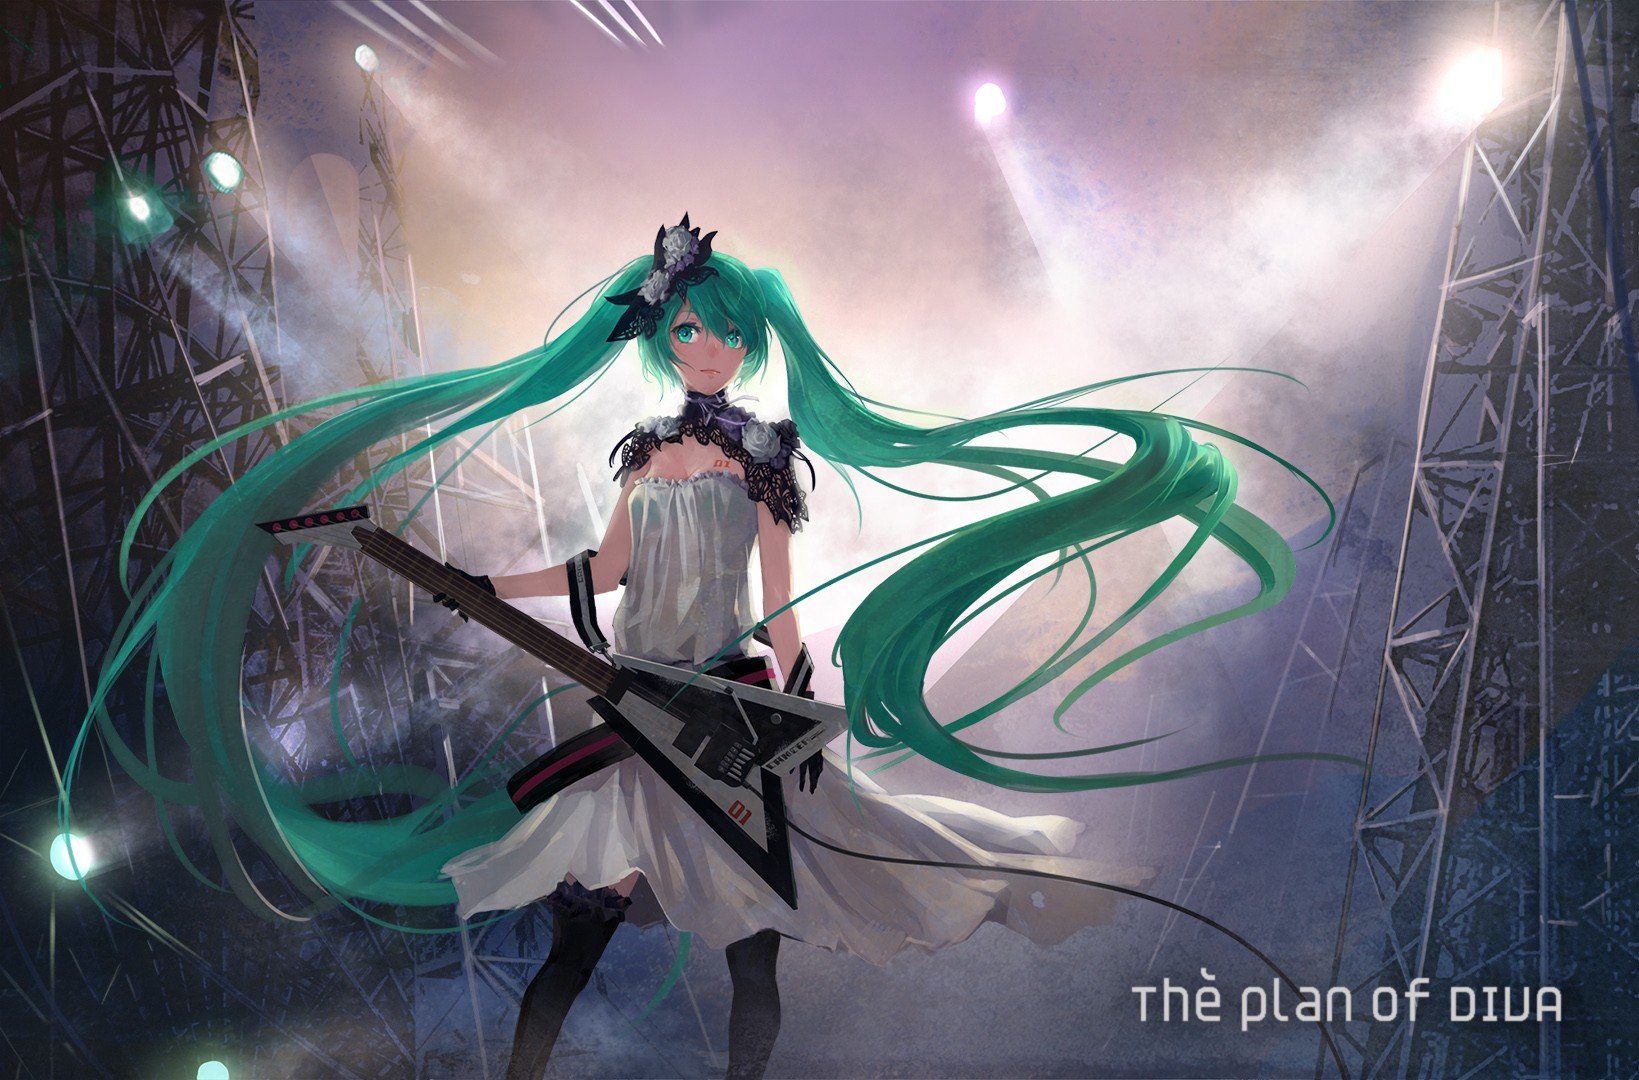 tattoos, Vocaloid, Gloves, Dress, Lights, Flowers, Stockings, Hatsune, Miku, Text, Long, Hair, Green, Eyes, Thigh, Highs, Green, Hair, Instruments, Guitars, Twintails, Electric, Guitars, Stage, White, Dress, Sof Wallpaper